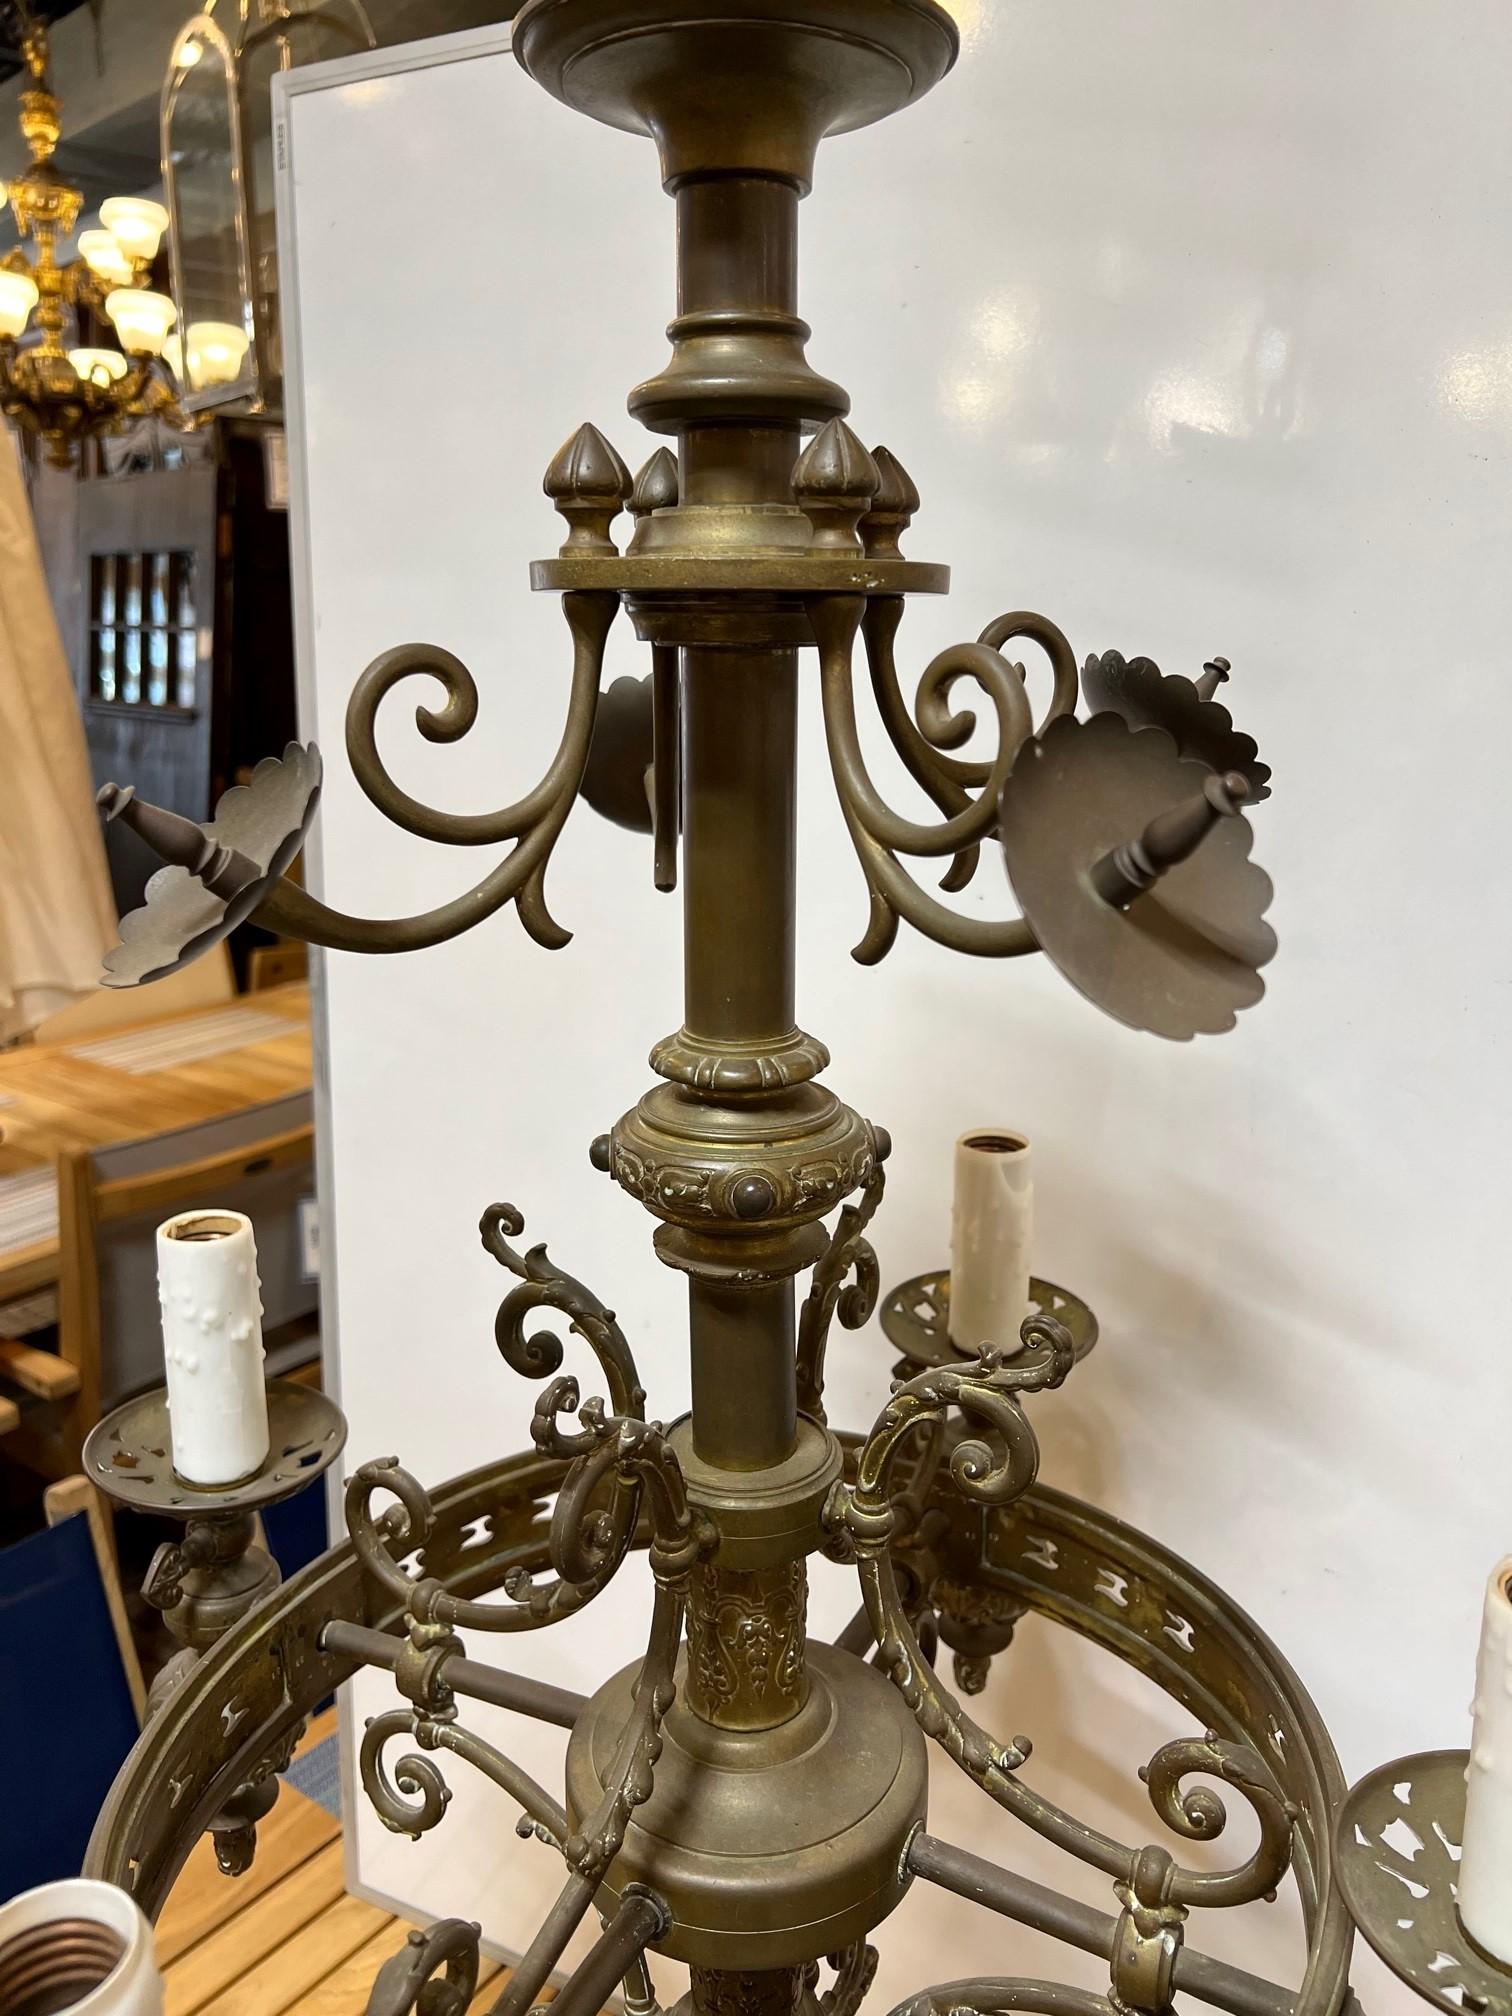 American Mid-19th Century Antique Bronze Gas Chandelier 4 Arm Electrified For Sale